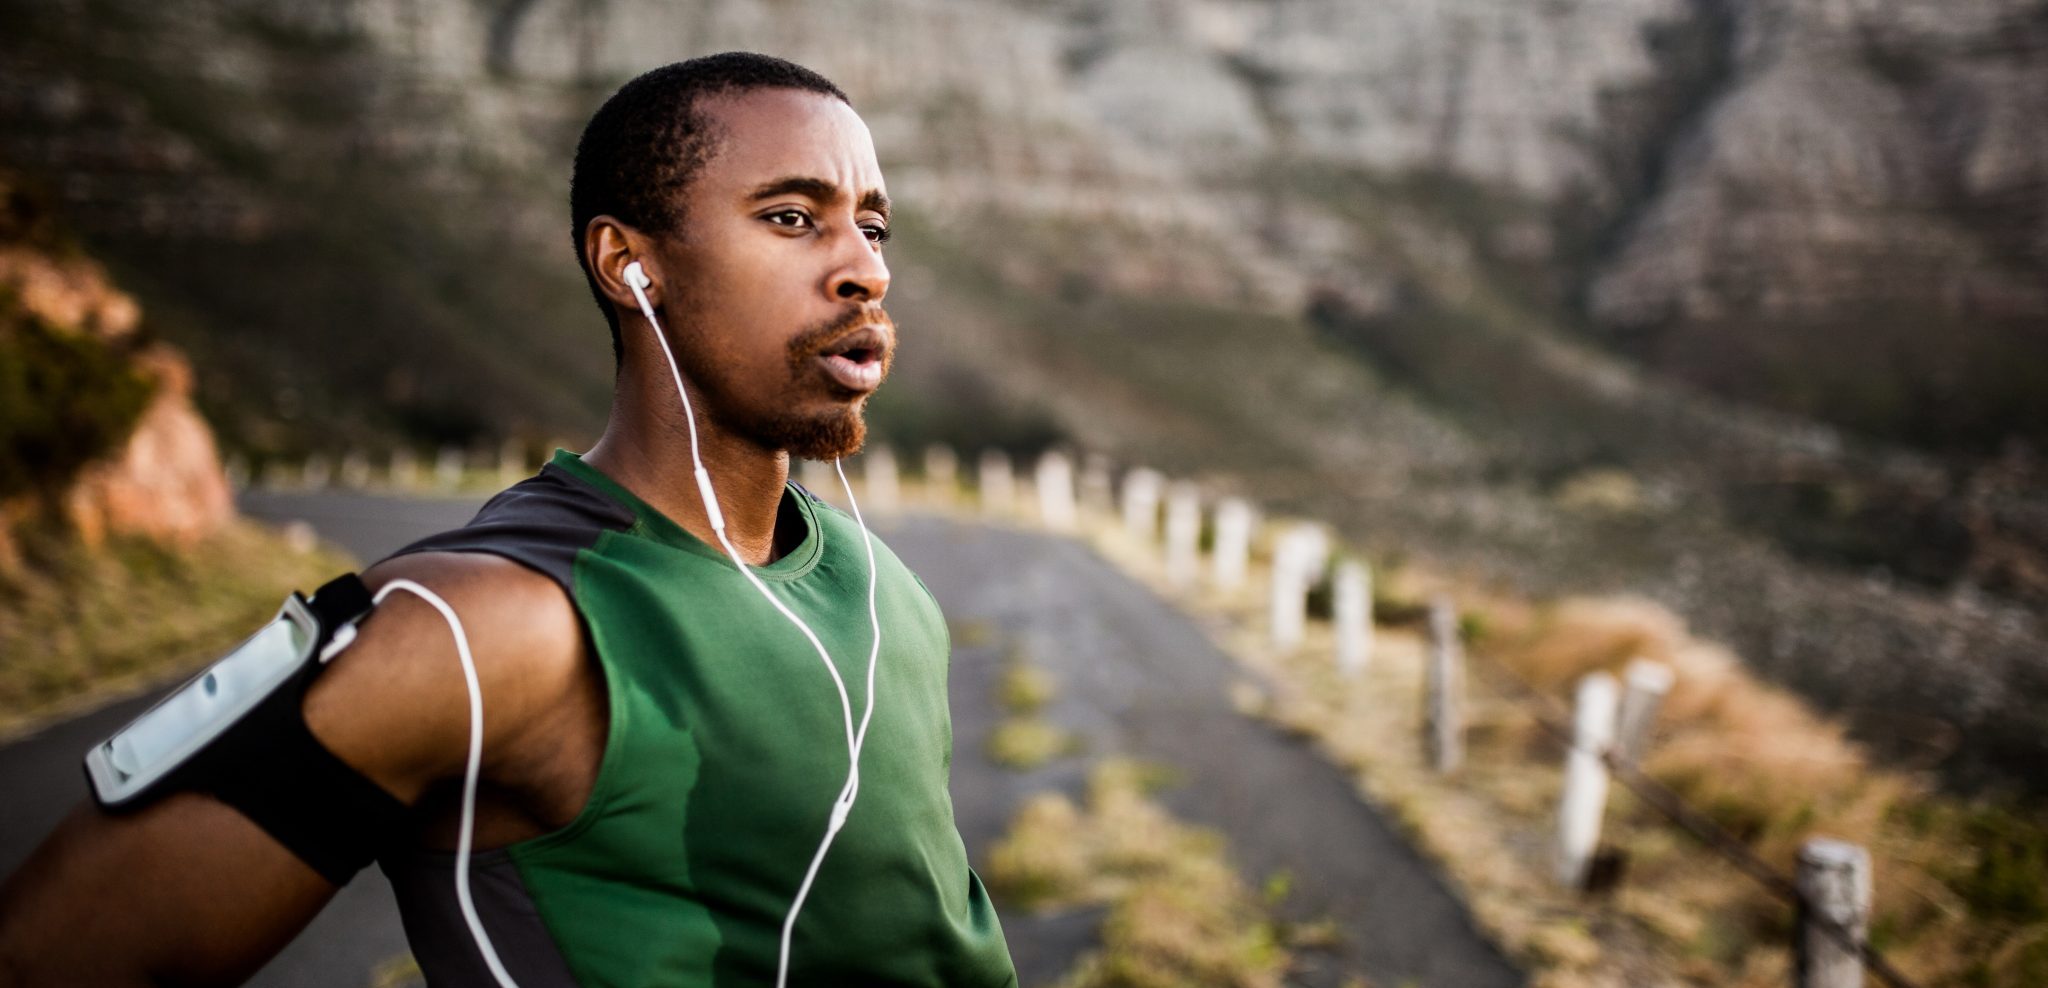 Your Fitness Routine After Quitting Smoking